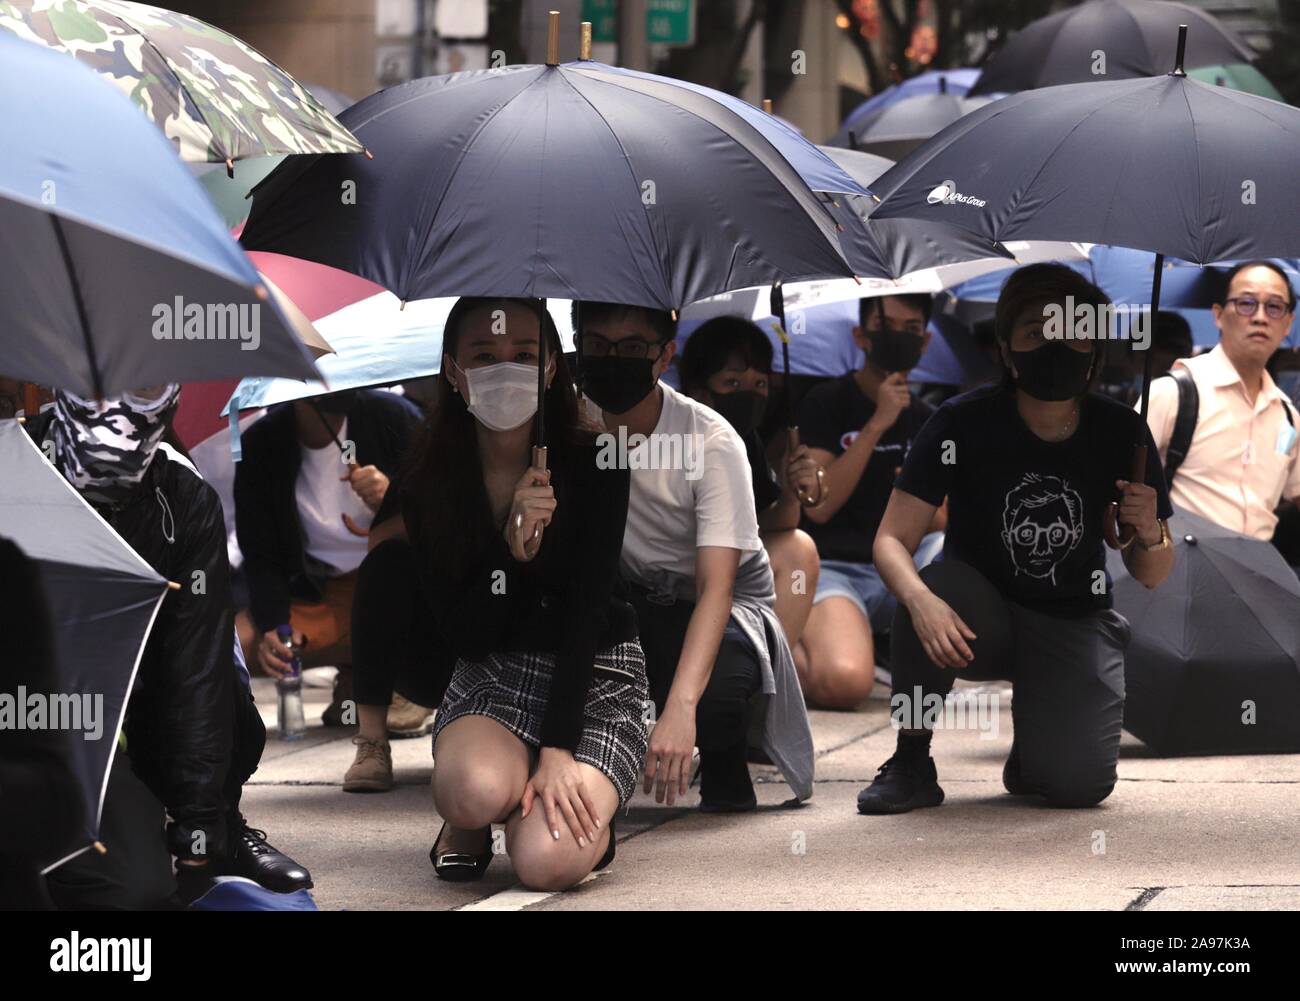 Hong Kong, China. 13th Nov, 2019. White Collars office workers staged a lunch hour flashmob protest for a 3rd day, blocking the main avenues confronting riot police with defiance in the financial hub in Central district. Credit: Liau Chung-ren/ZUMA Wire/Alamy Live News Stock Photo